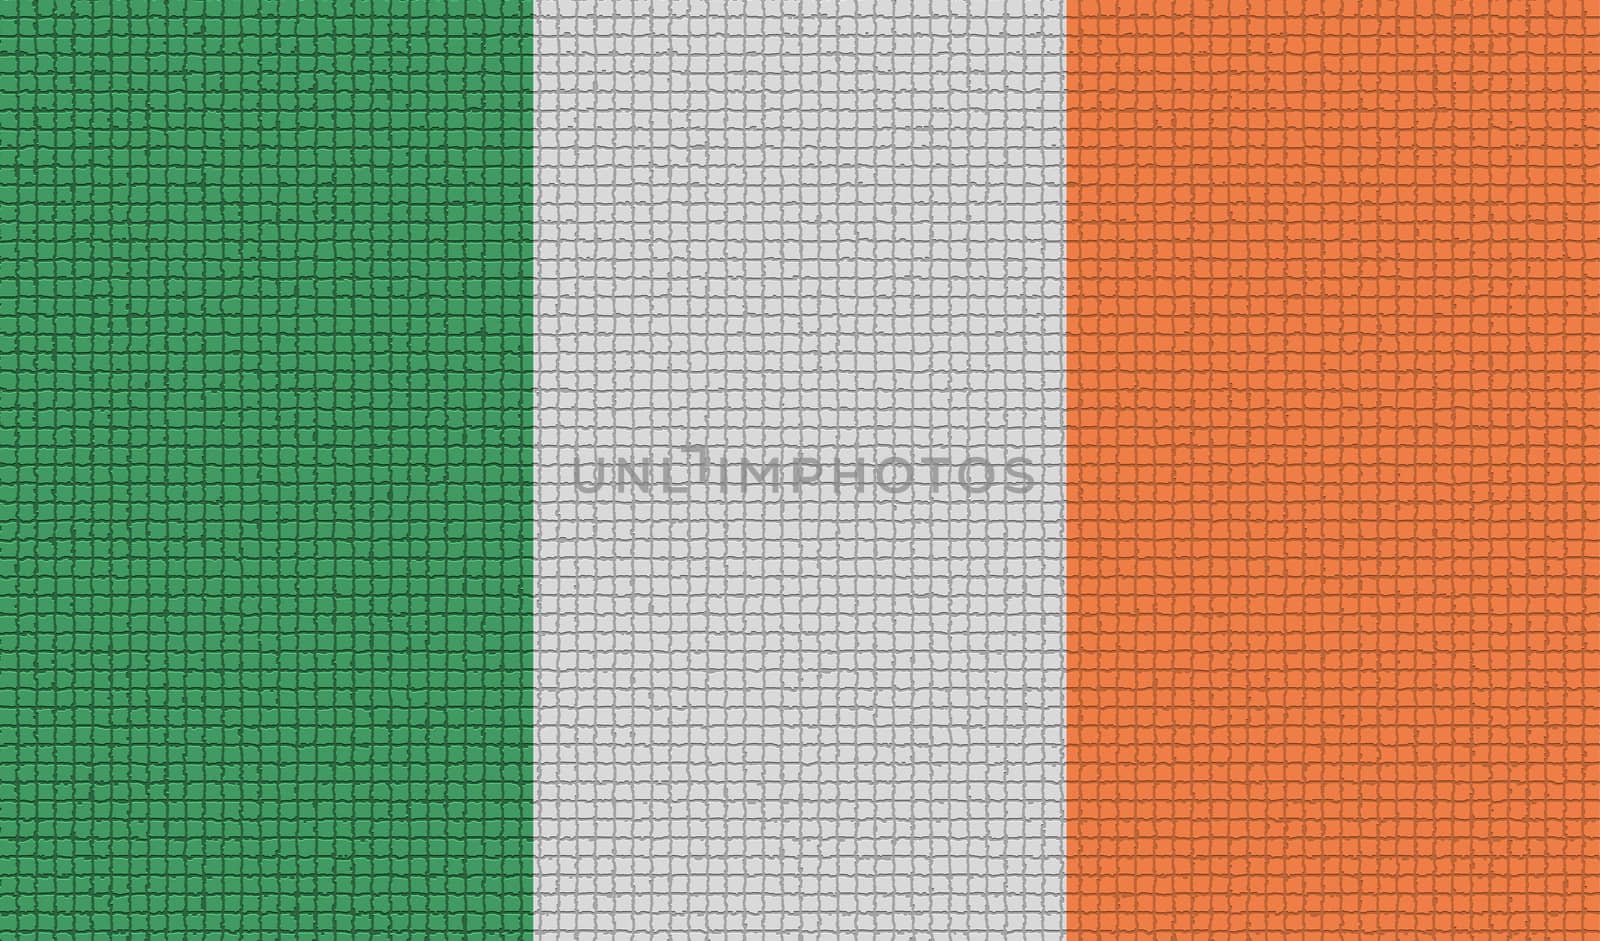 Flags of Ireland with abstract textures. Rasterized version